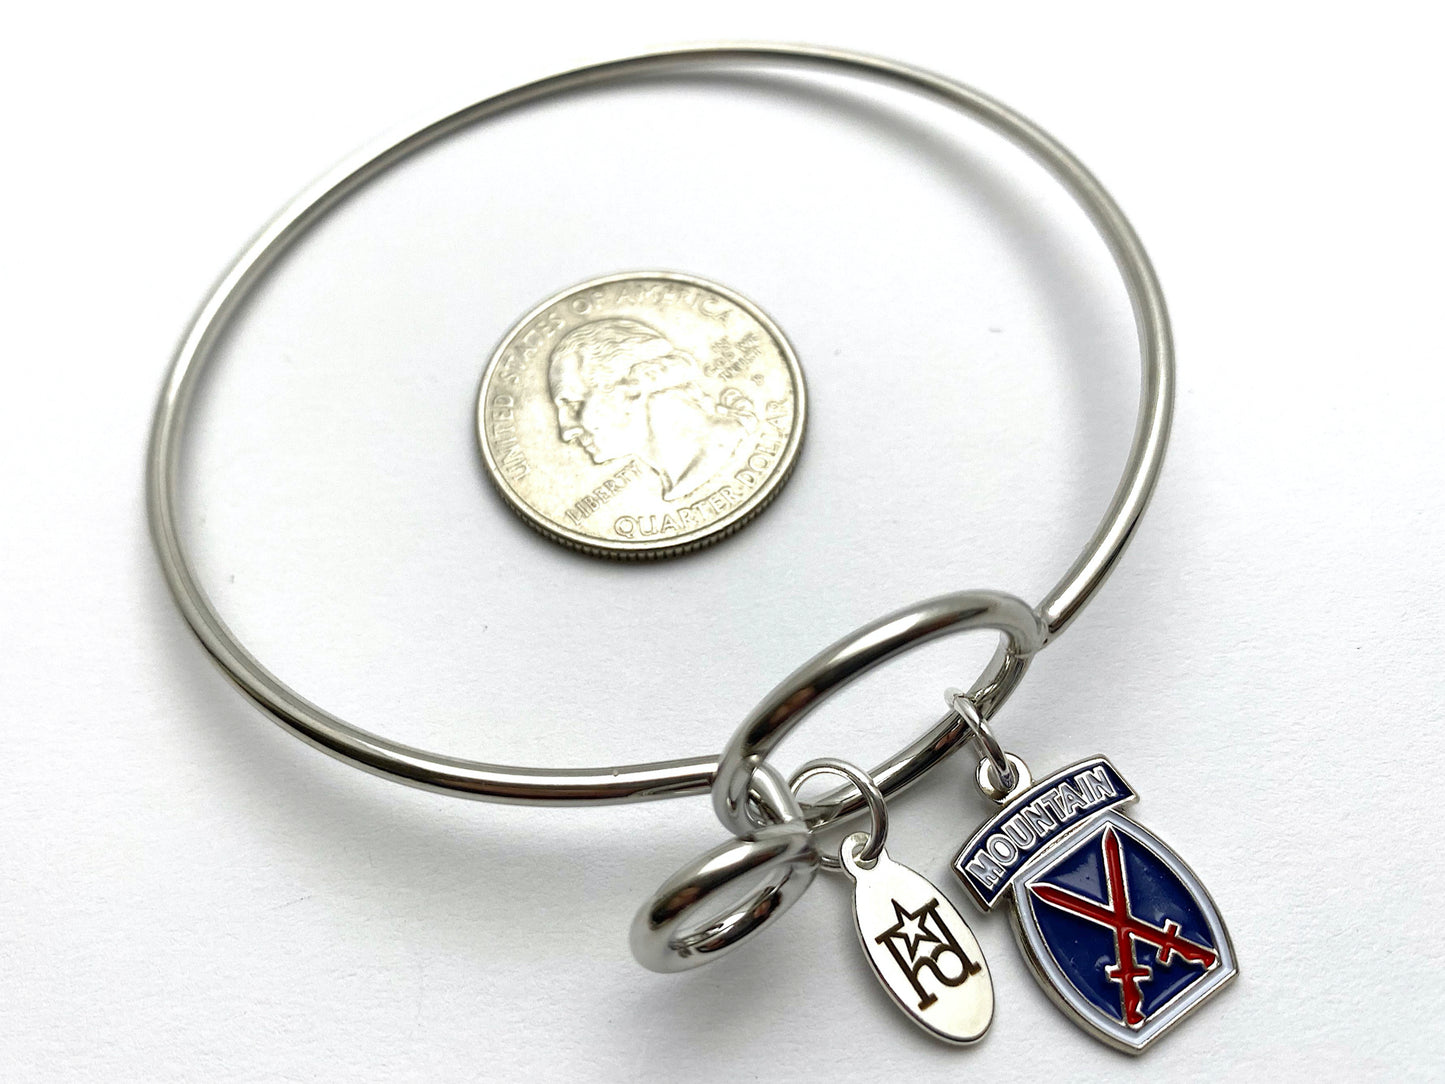 10th Mountain Division Memory Wire Bracelet